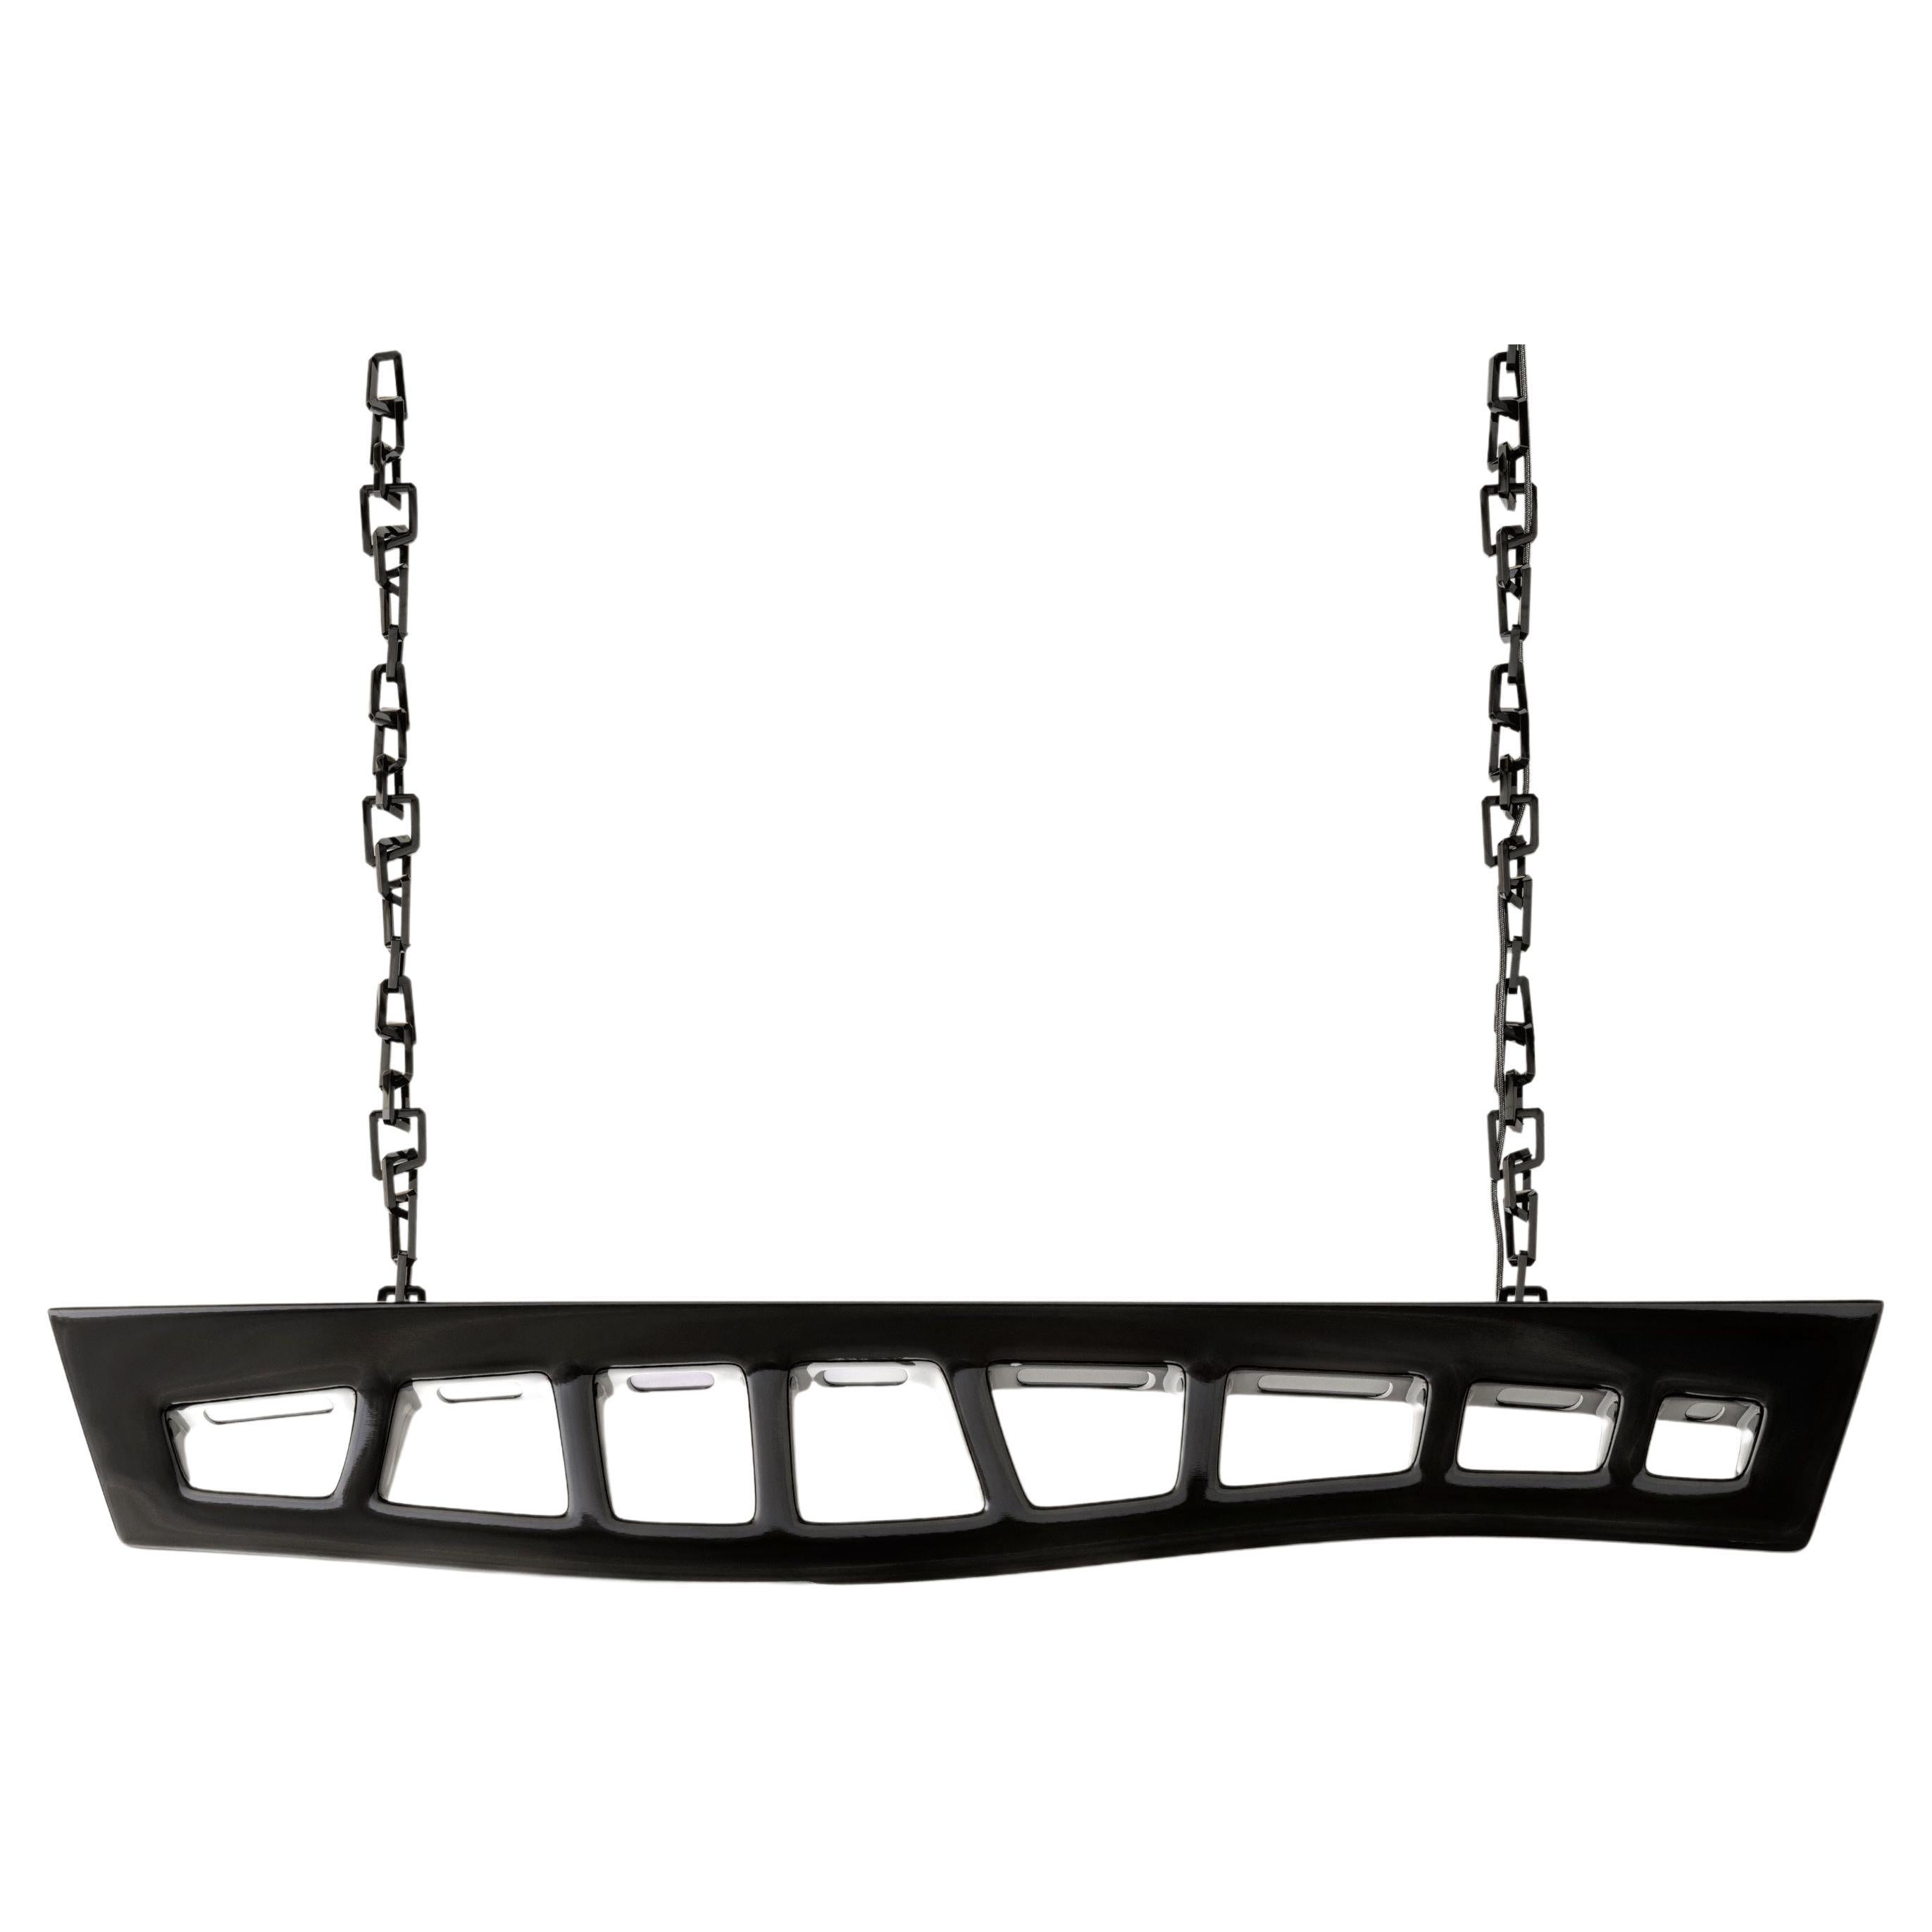 Barracuda Chandelier in Piano Black Finish by Palena Furniture 